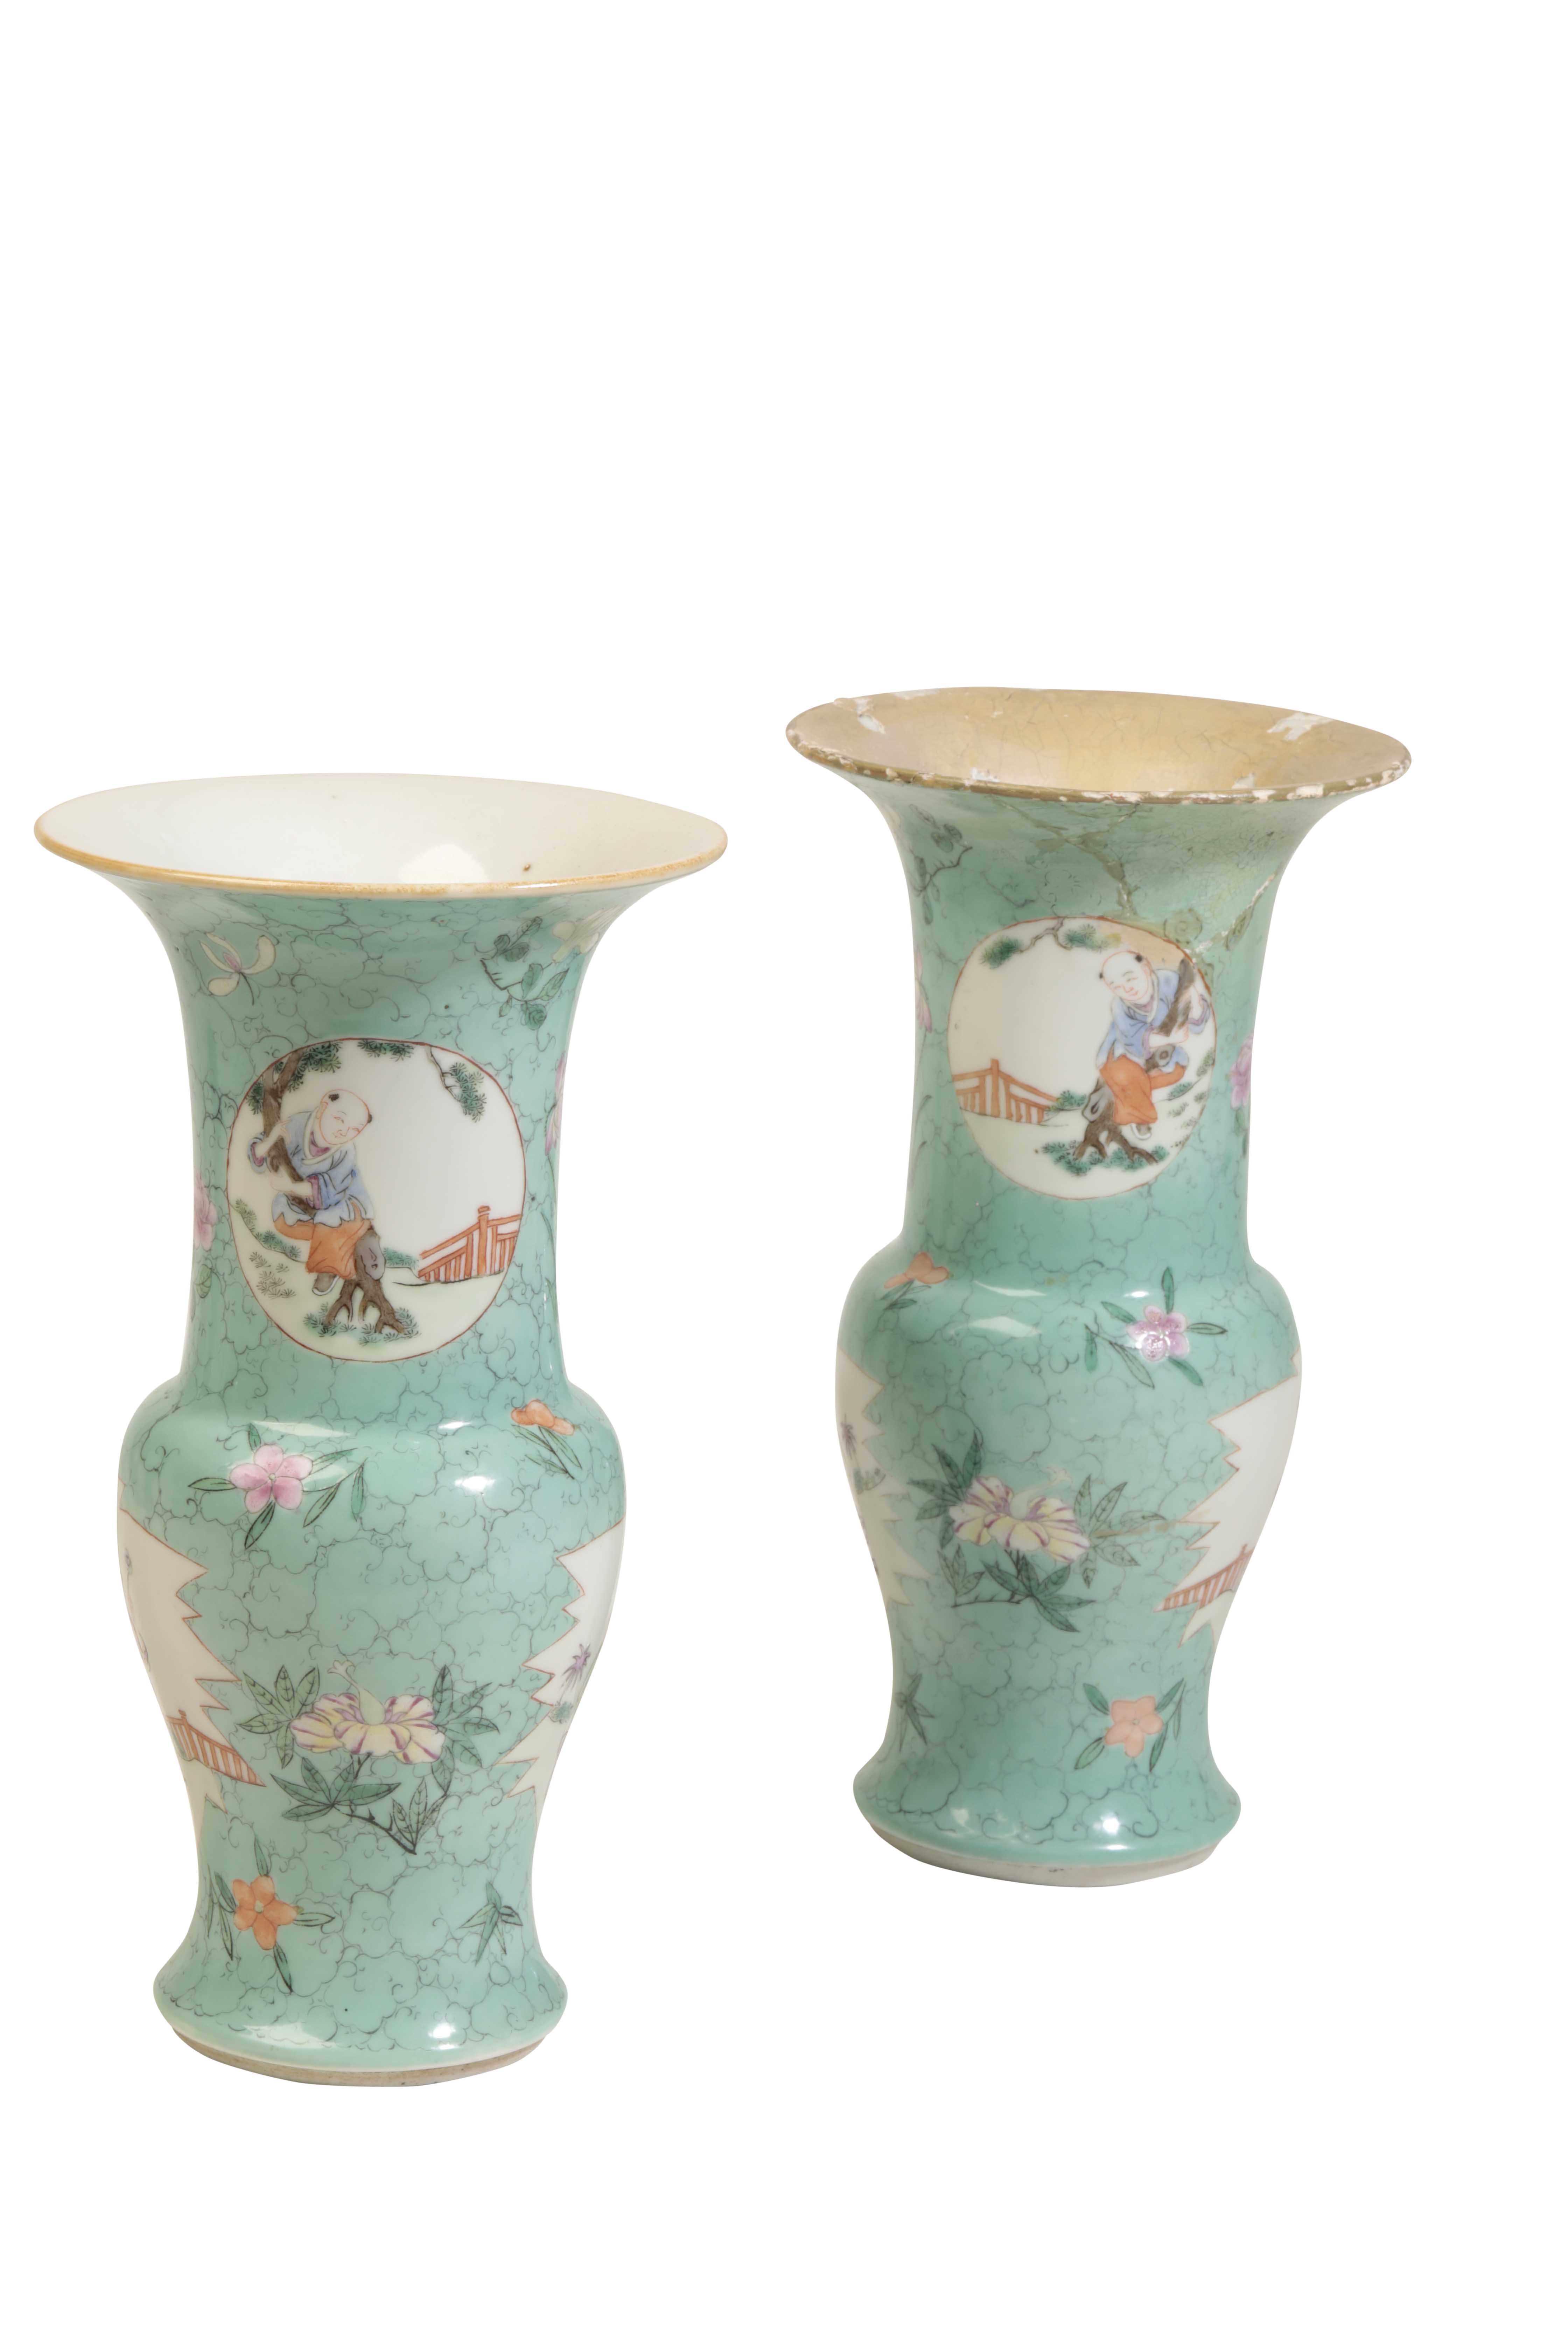 PAIR OF FAMILLE ROSE AND FAUX-TURQUOISE VASES, QIANLONG / JIAQING PERIOD - Image 2 of 2